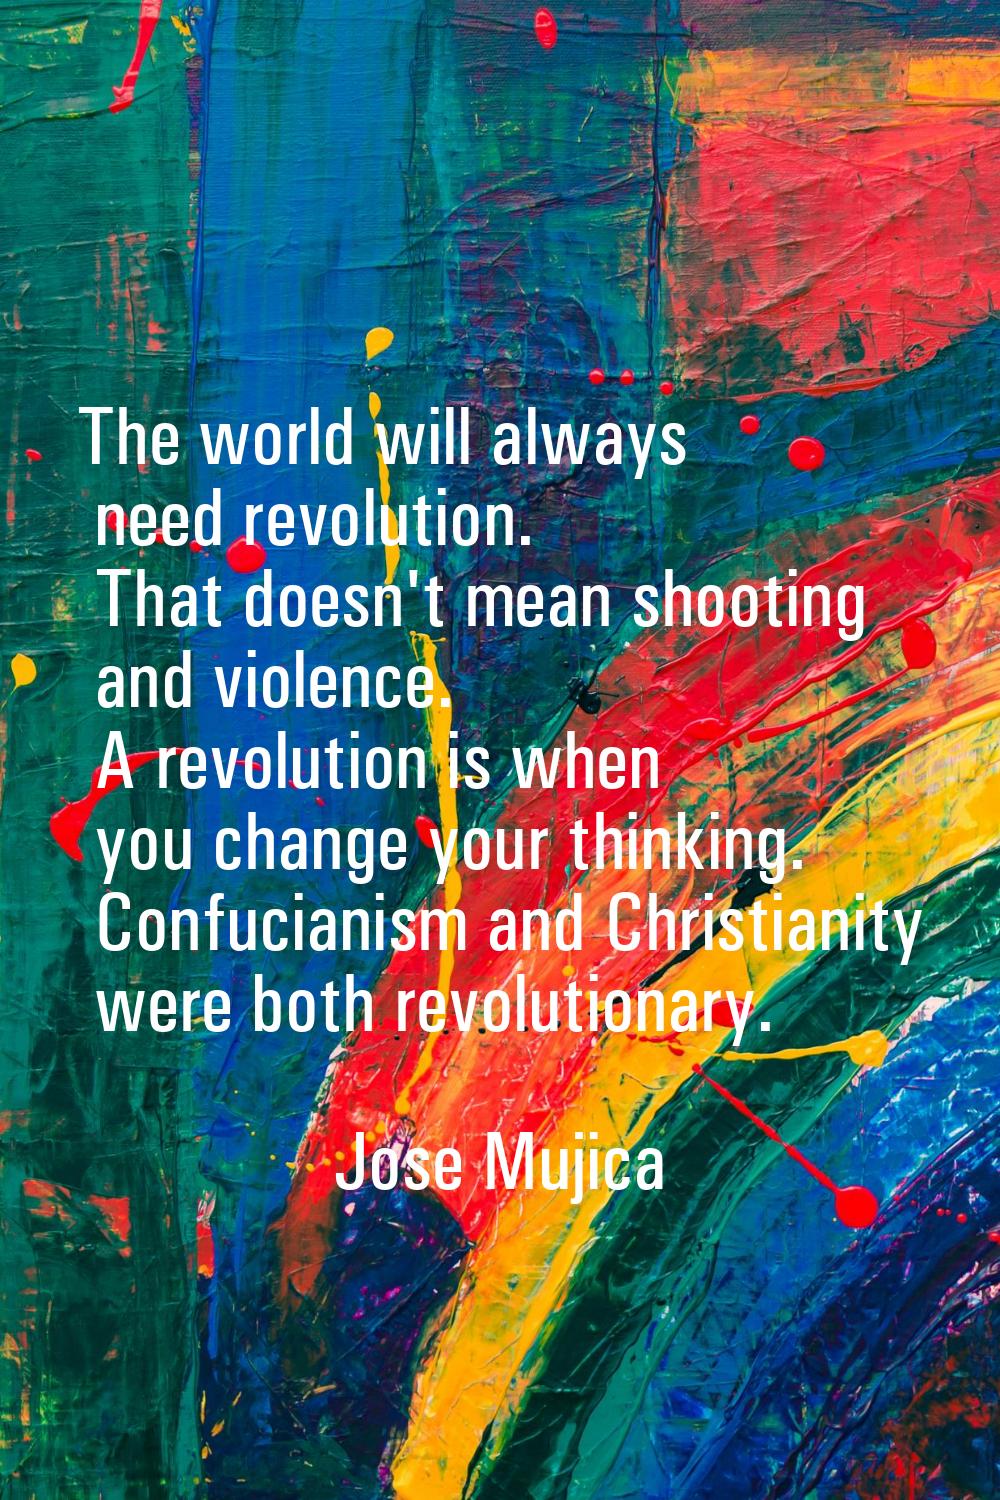 The world will always need revolution. That doesn't mean shooting and violence. A revolution is whe